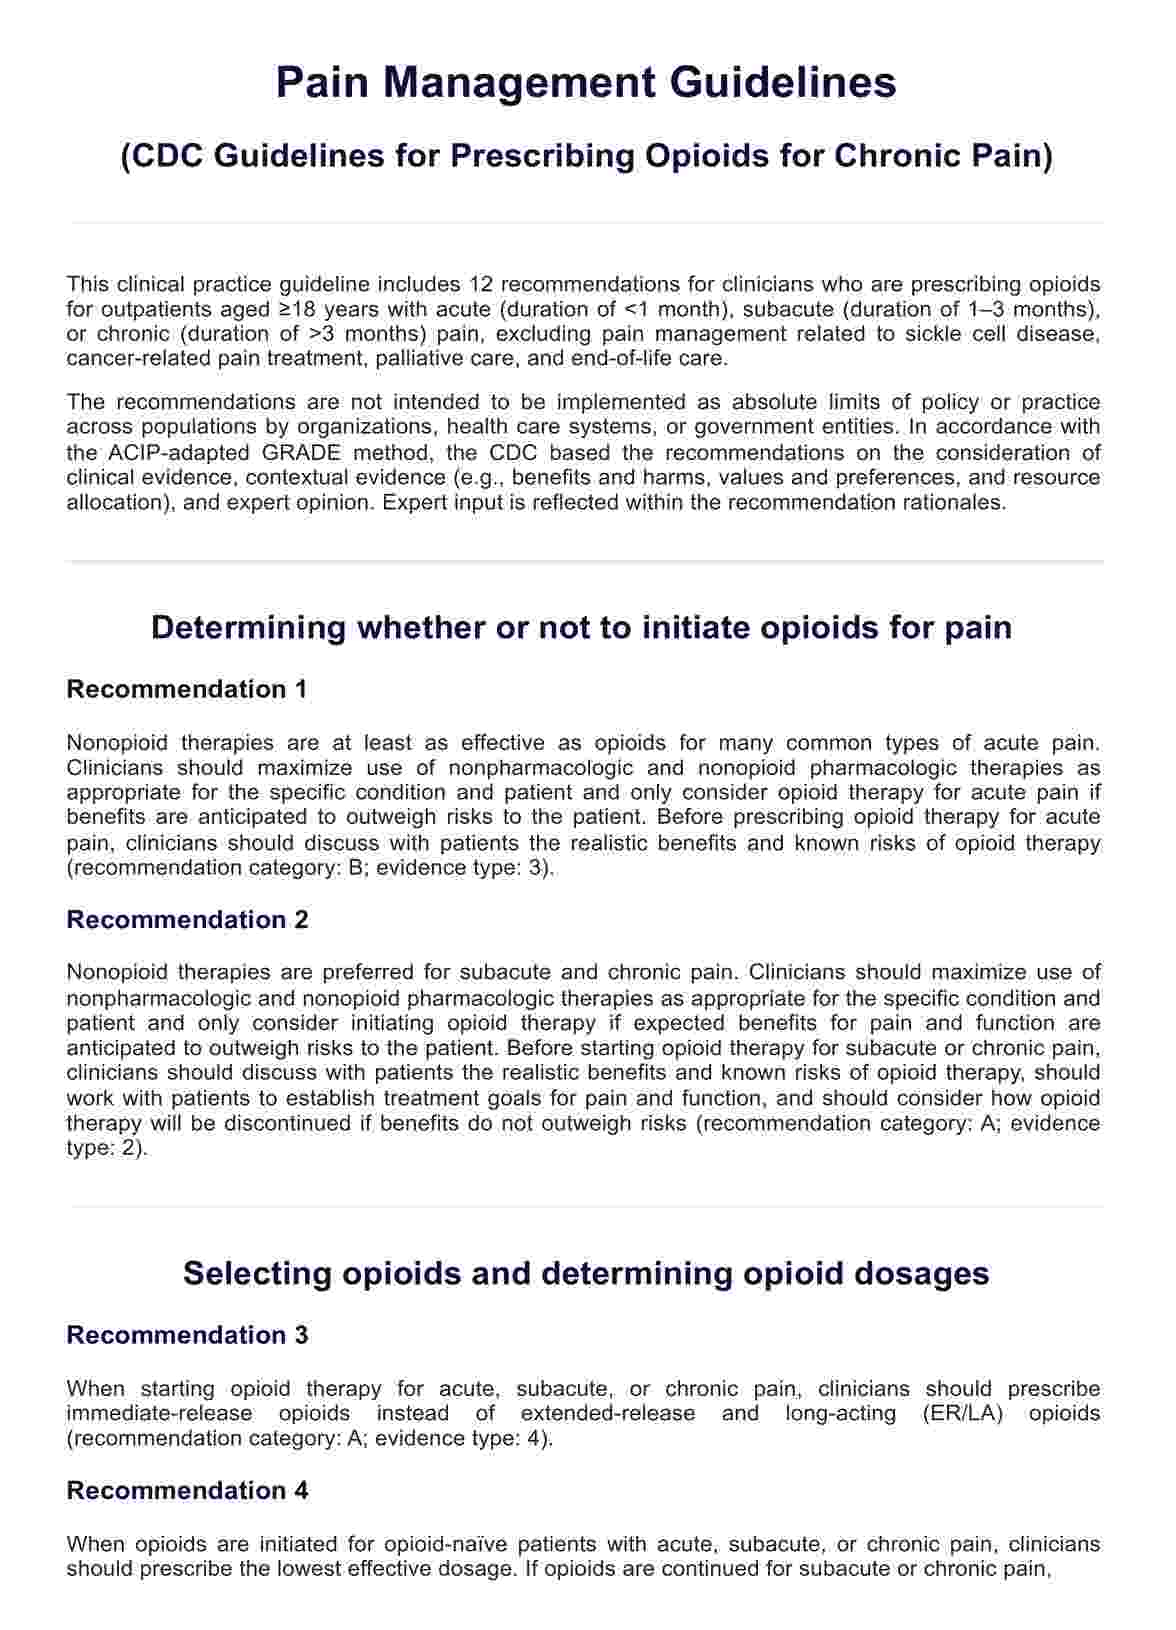 Pain Management Guidelines (CDC Guideline for Prescribing Opioids for Chronic Pain) PDF Example